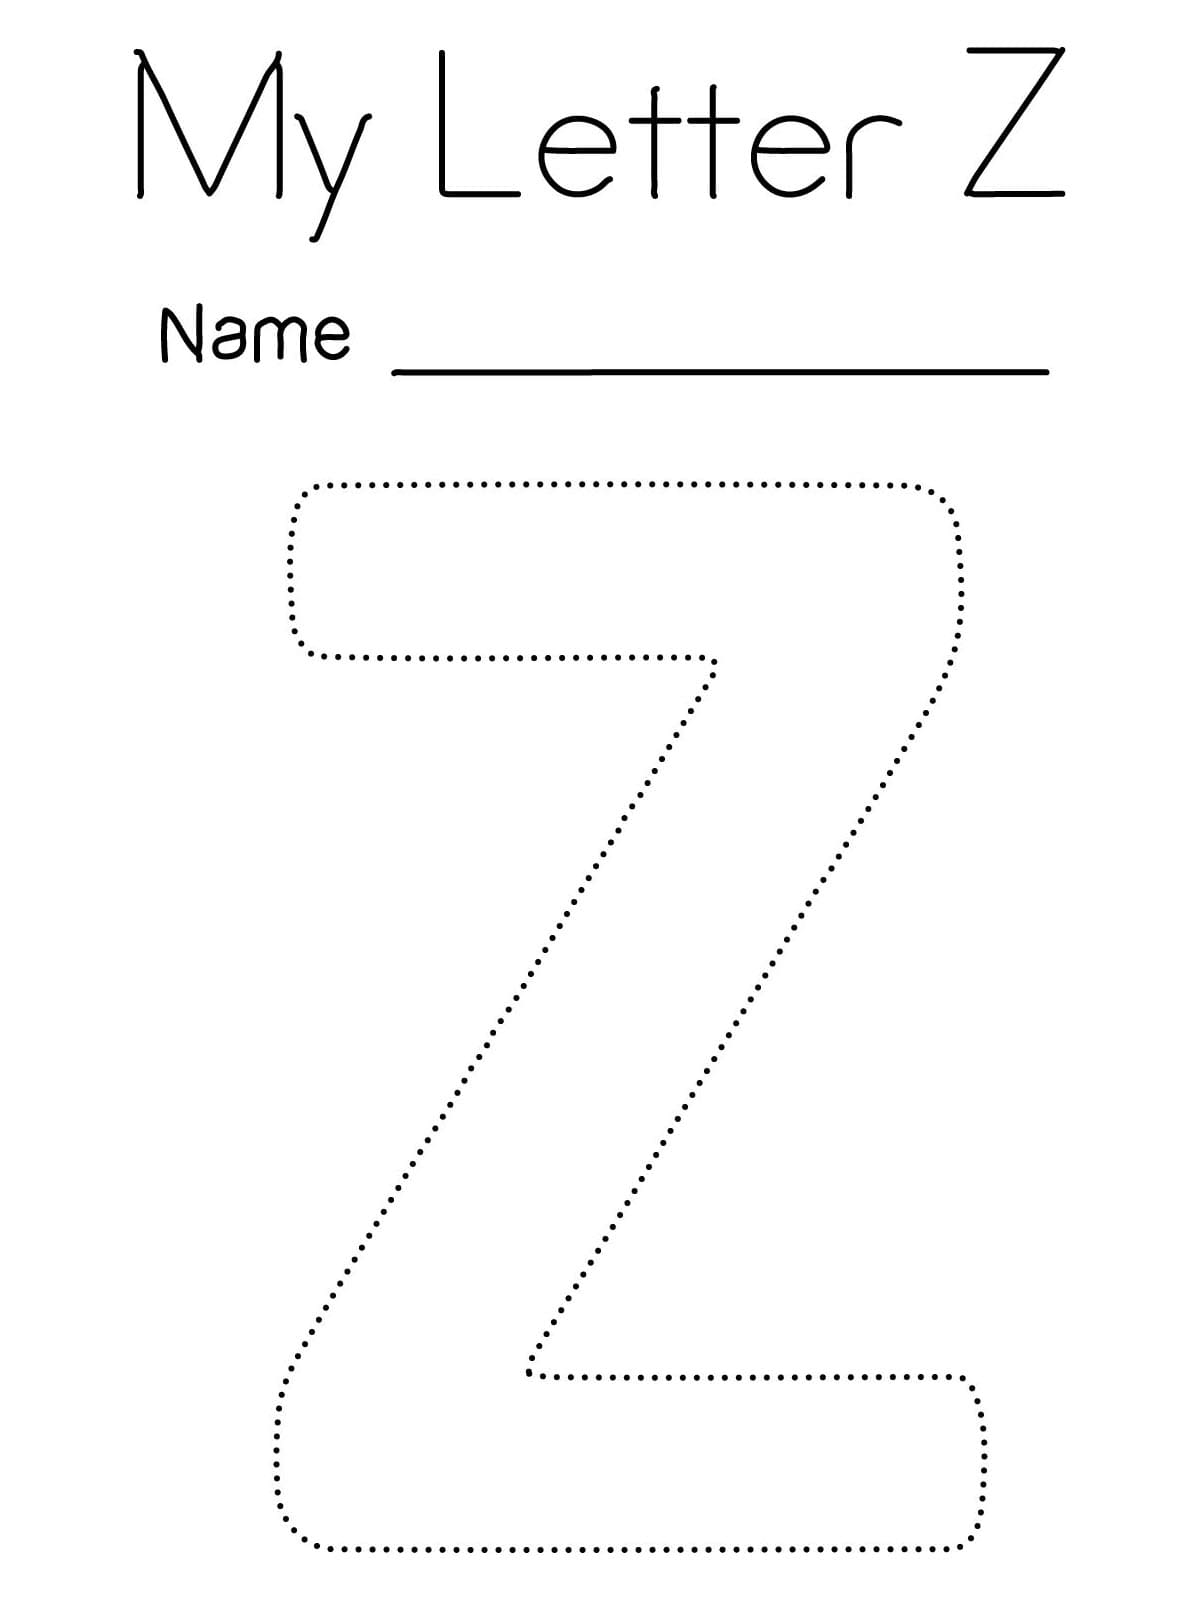 Letter Z Tracing Sheet coloring page - Download, Print or Color Online ...